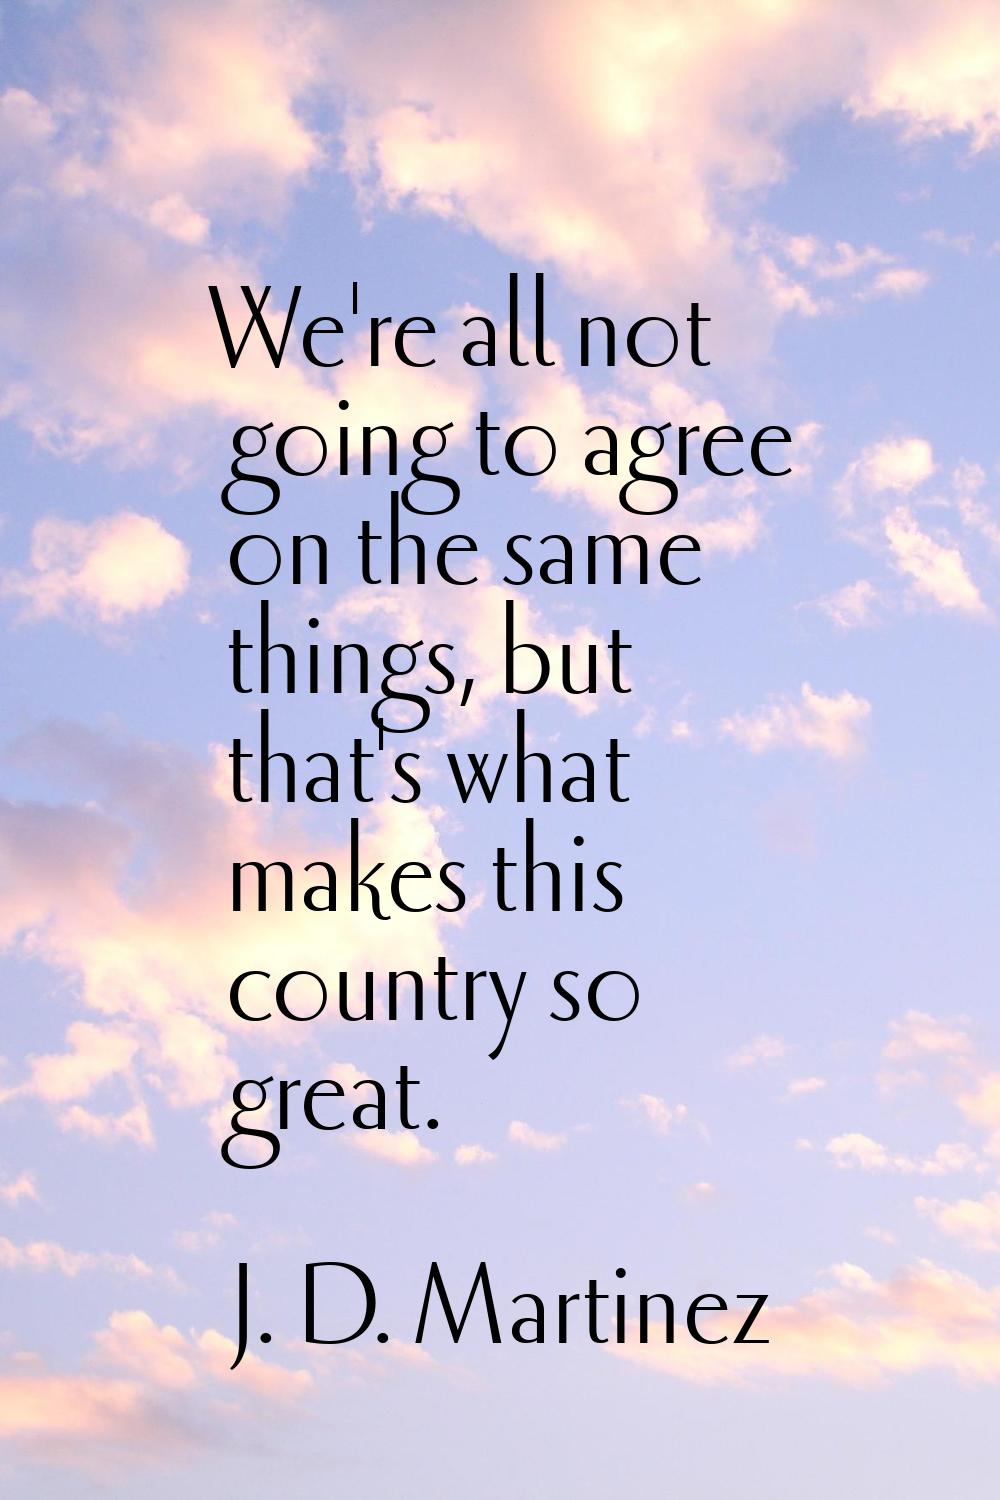 We're all not going to agree on the same things, but that's what makes this country so great.